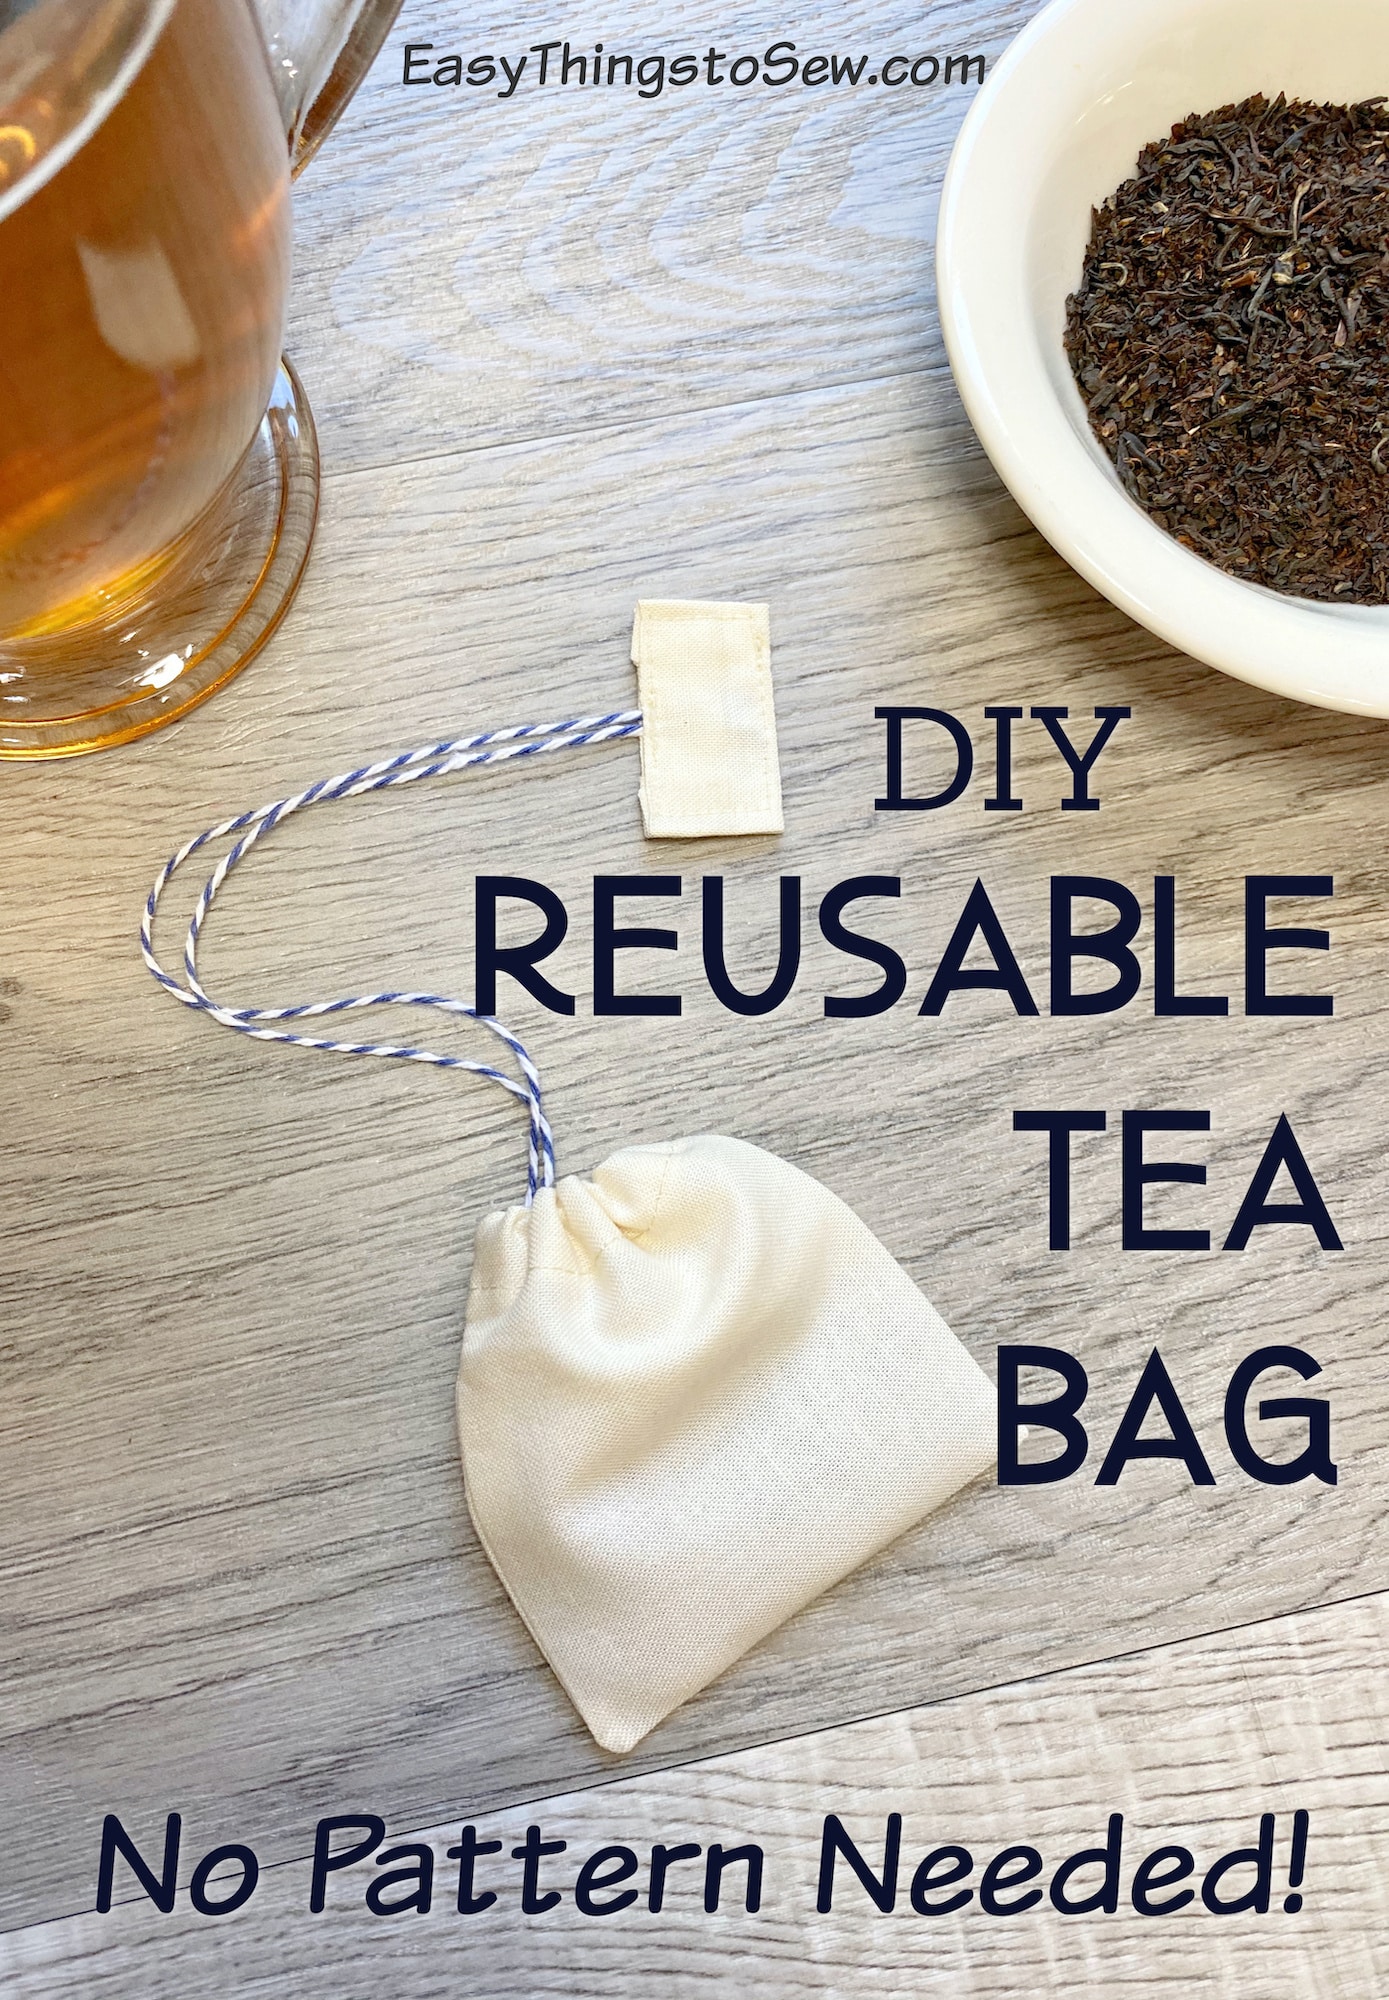 How to Sew a Reusable Muslin Tea Bag - Easy Things to Sew